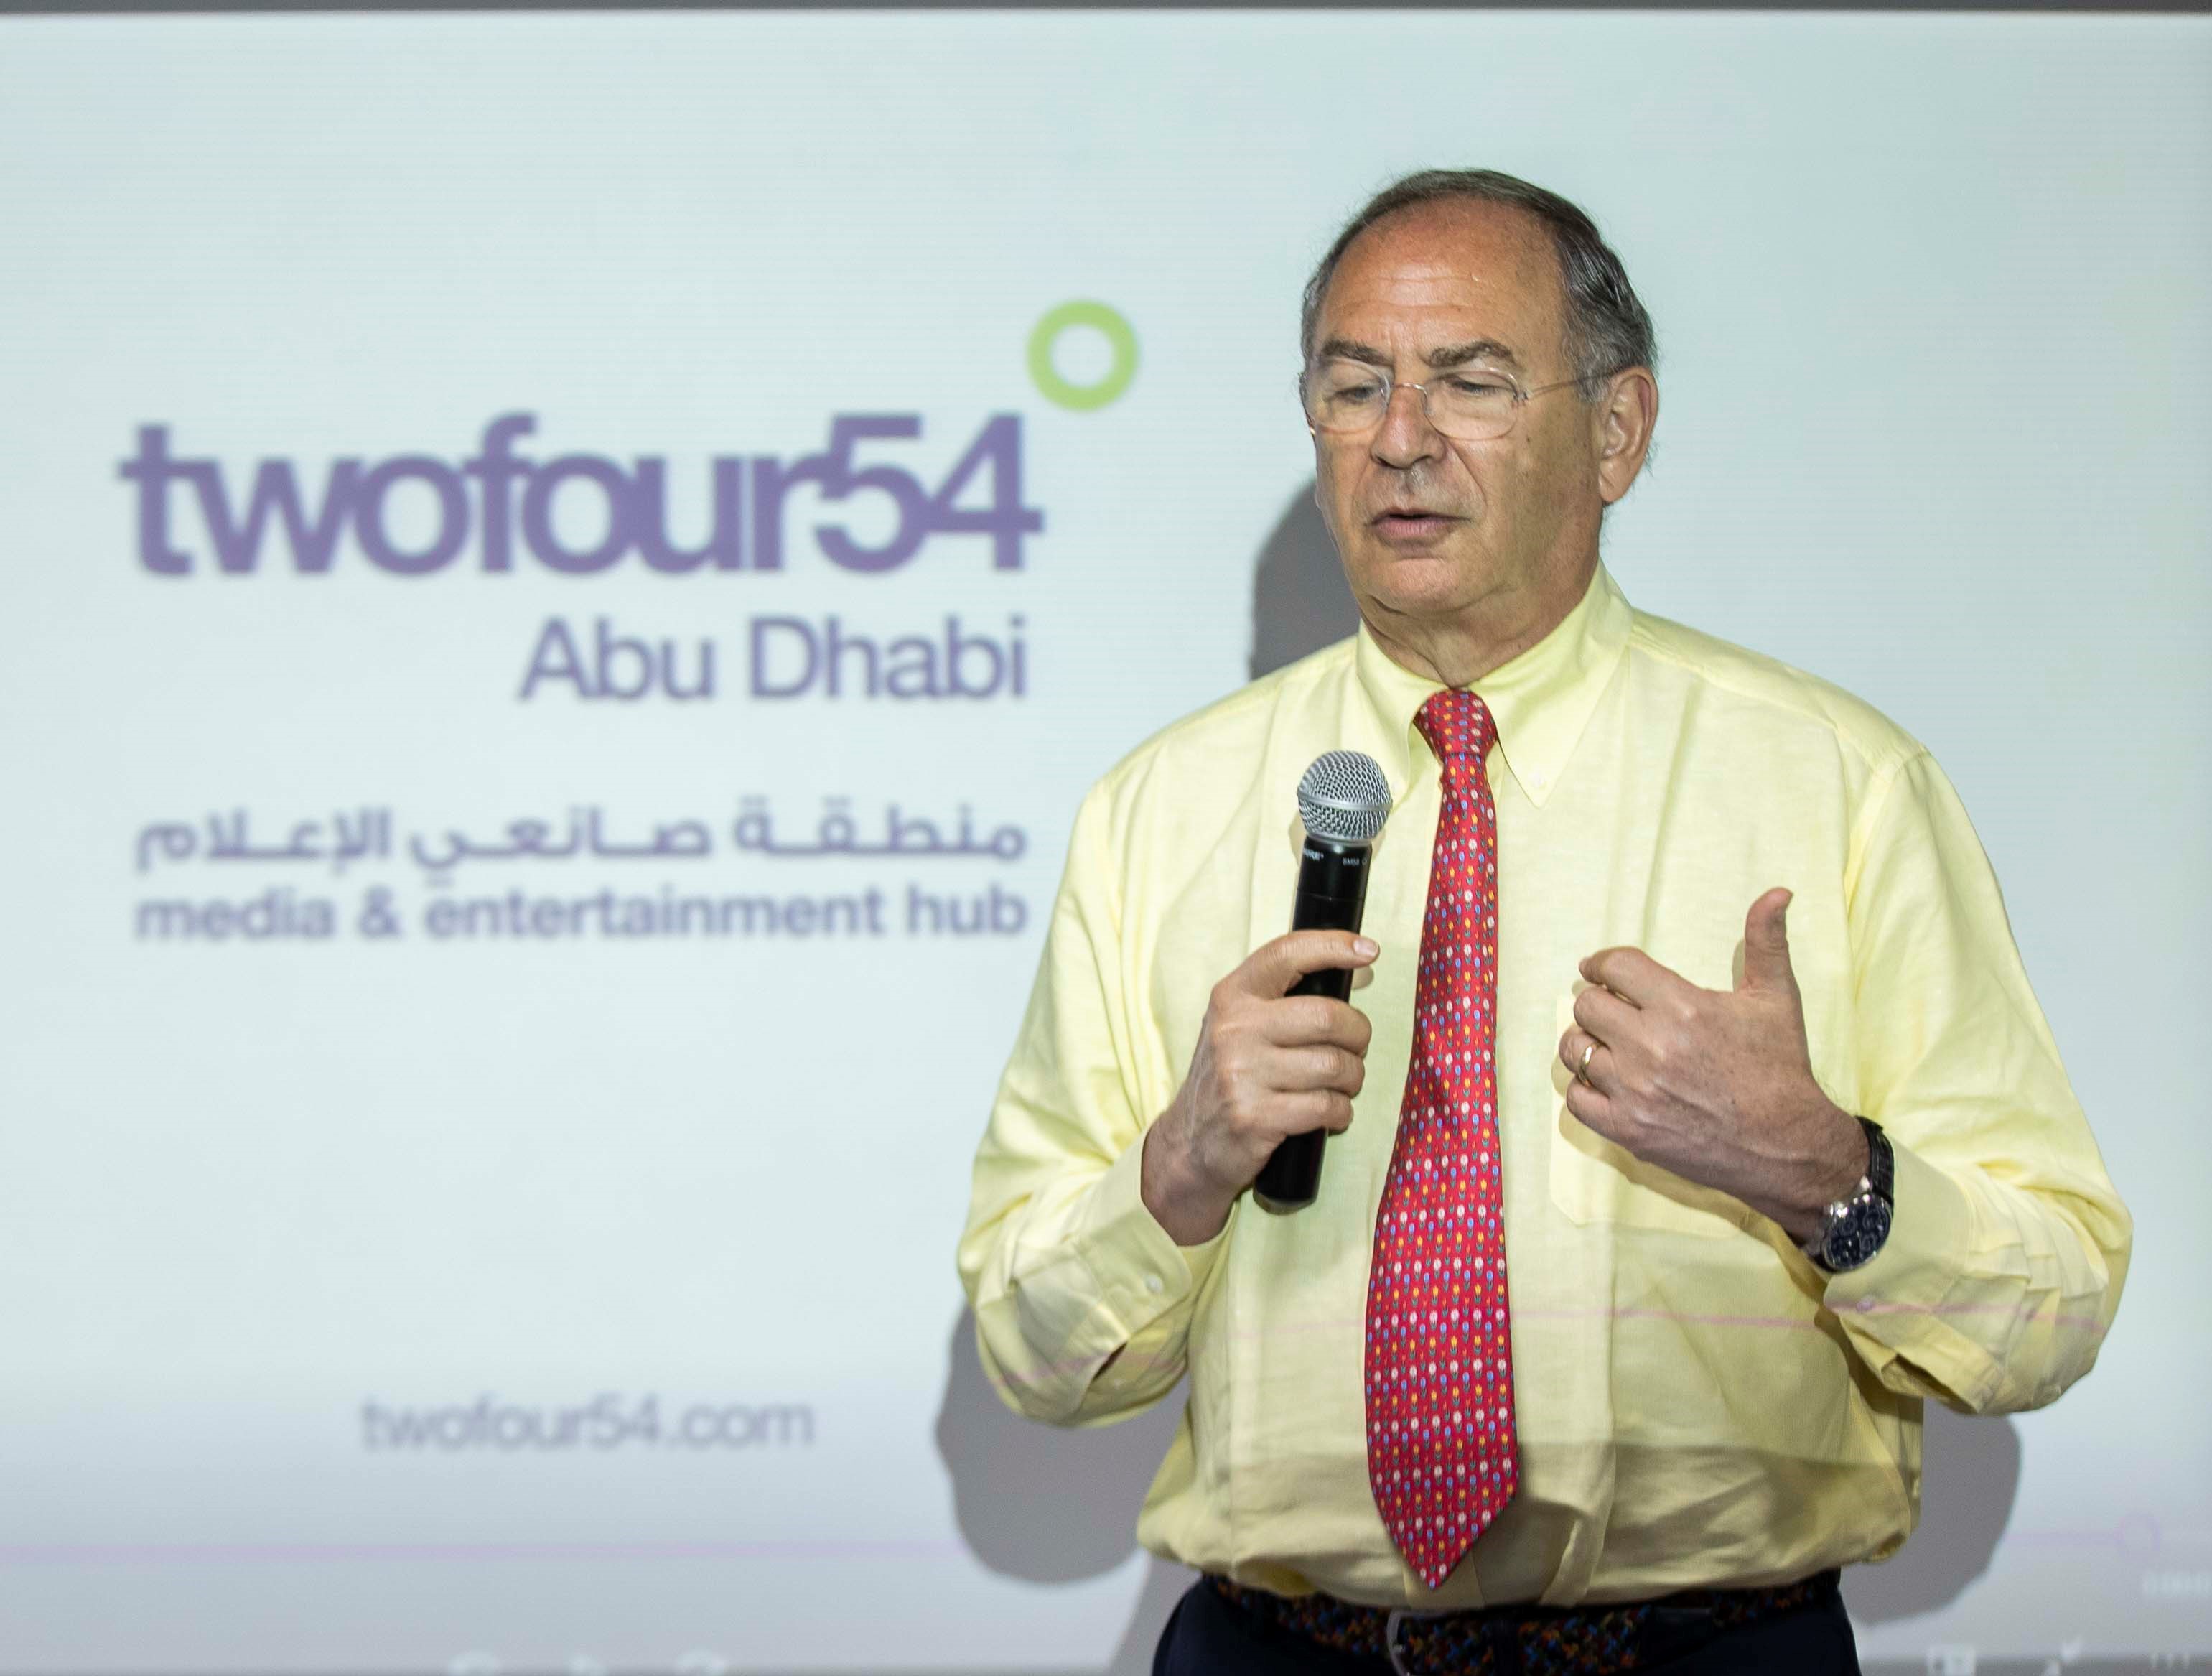 Global Media Leader Michael Garin Appointed CEO Of twofour54 Abu Dhabi